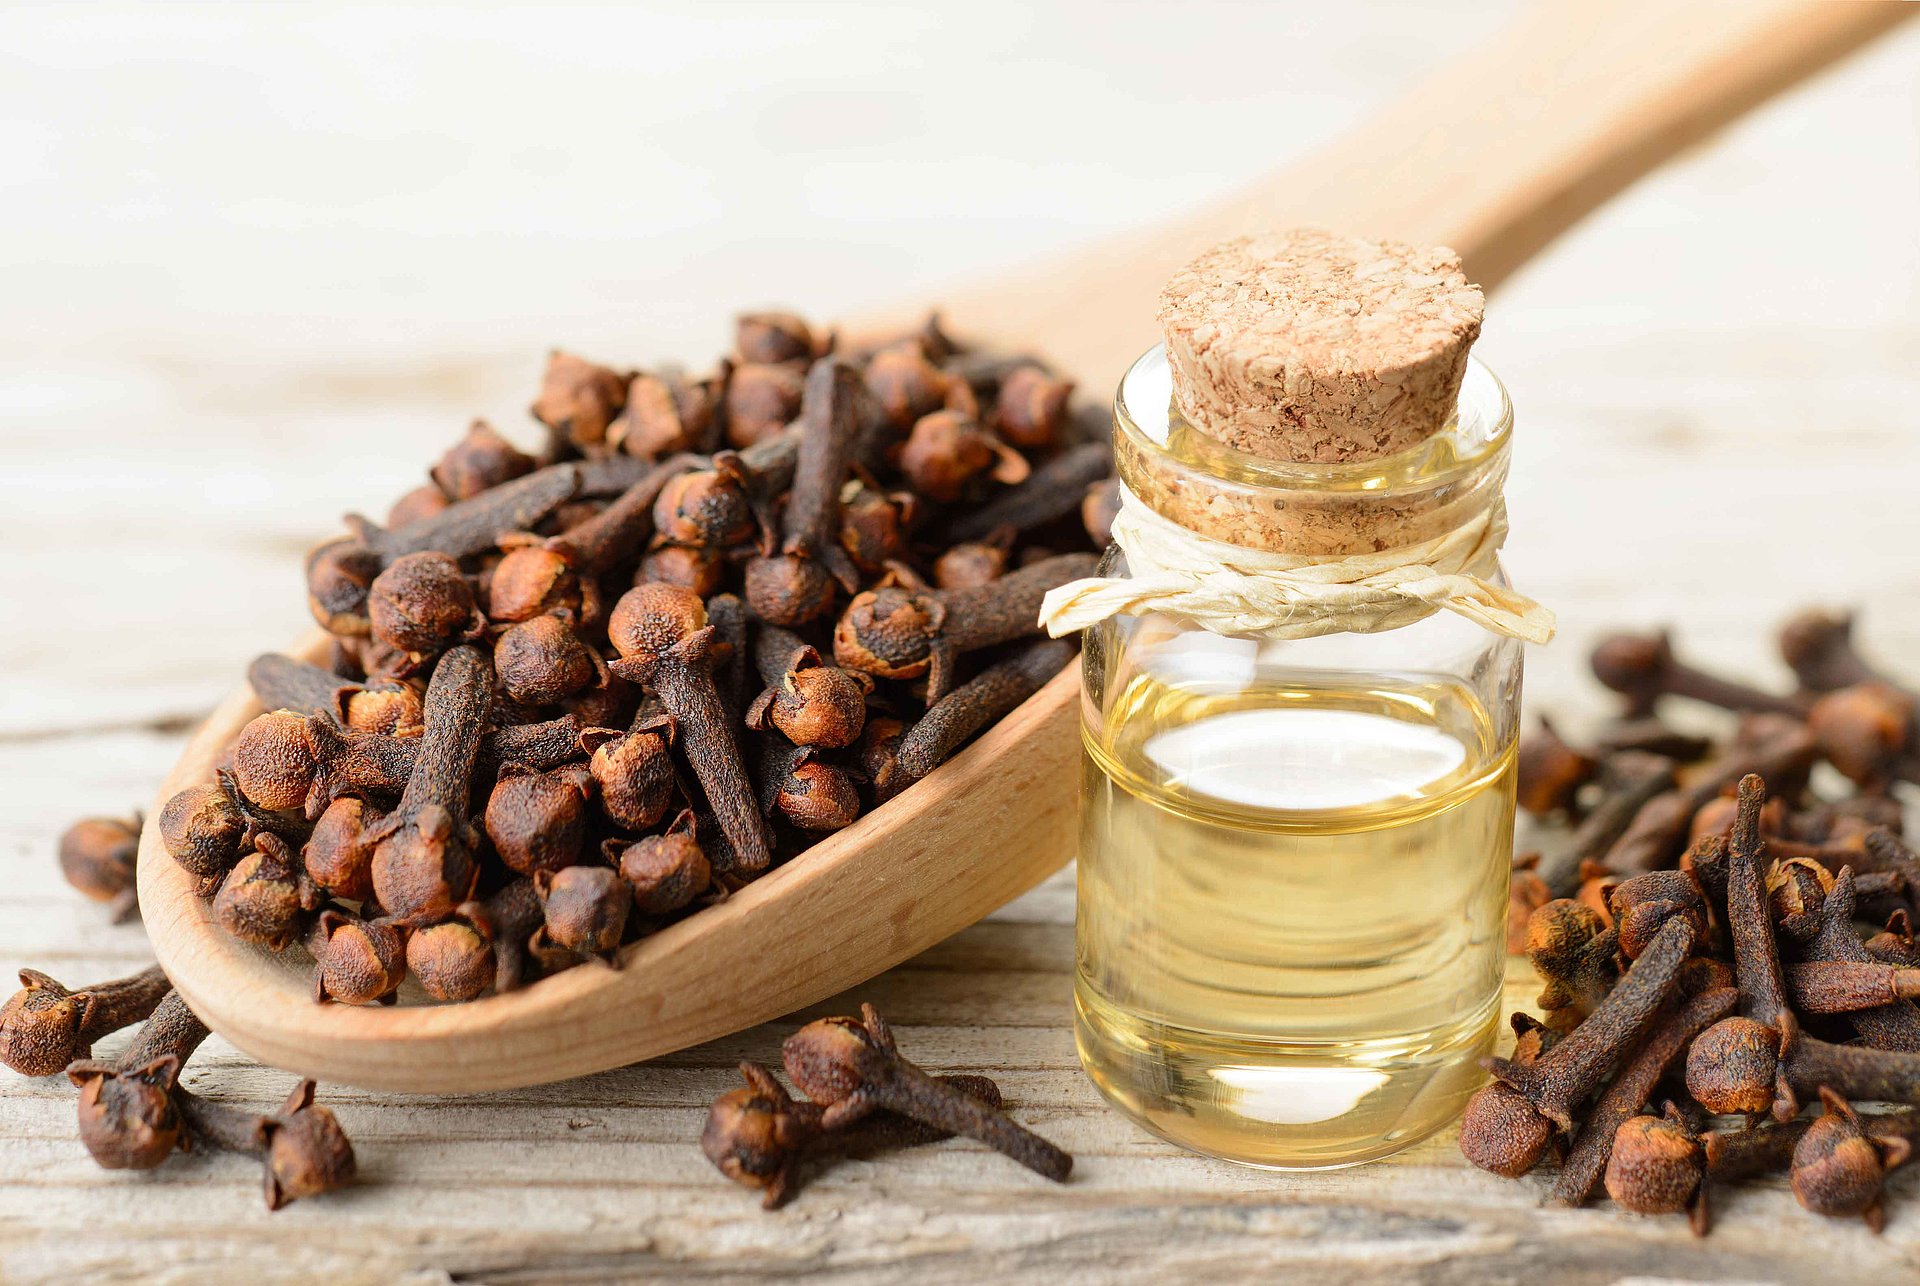 [Translate to Englisch:] Cloves and clove oil